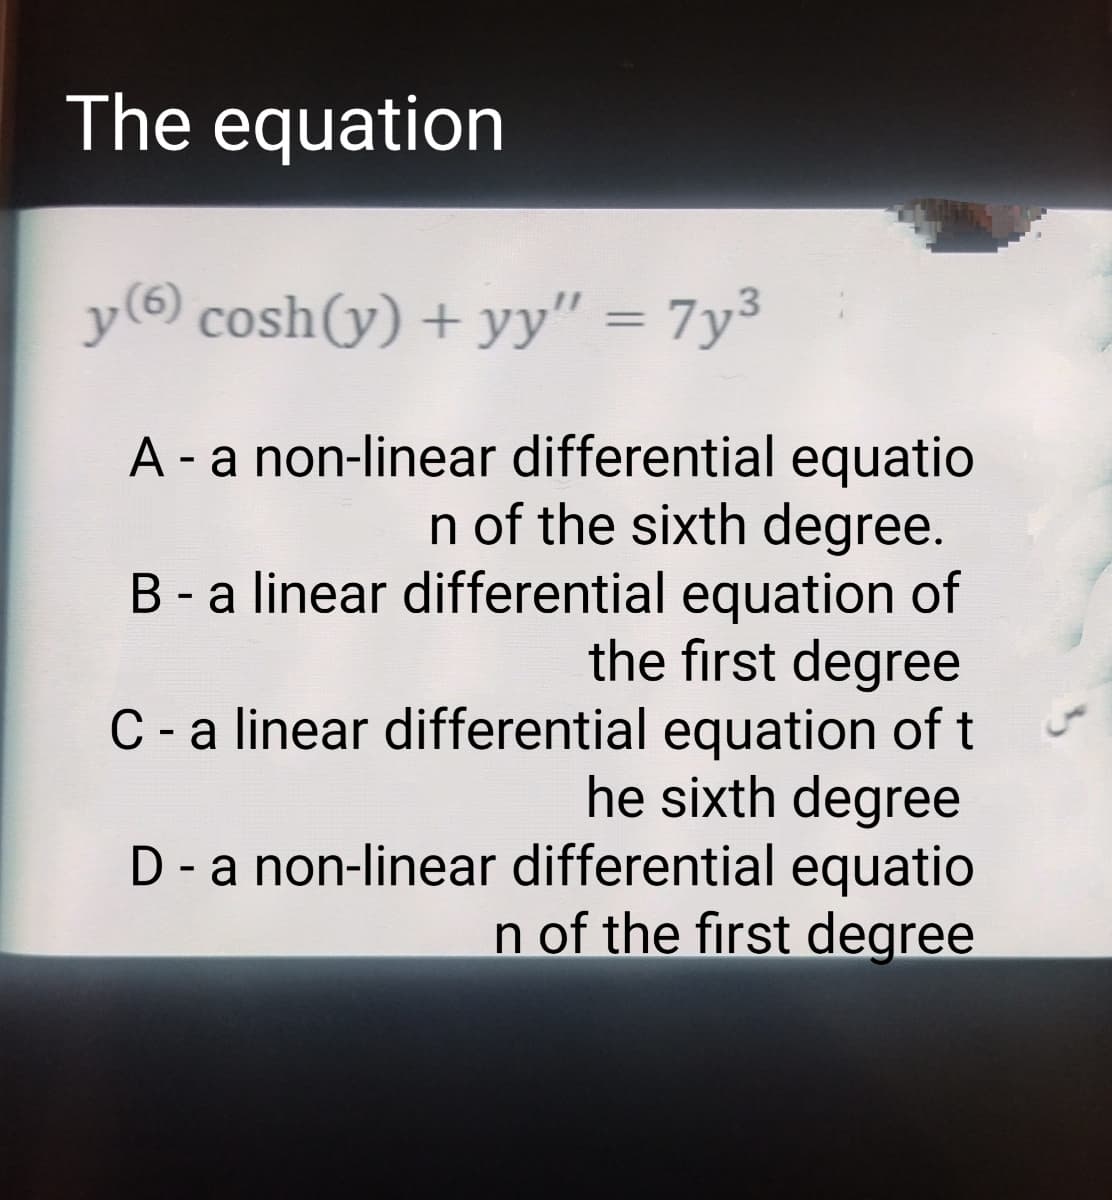 The equation
y (6) cosh(y) + yy" = 7y³
A - a non-linear differential equatio
n of the sixth degree.
B - a linear differential equation of
the first degree
C-a linear differential equation of t
he sixth degree
D - a non-linear differential equatio
n of the first degree